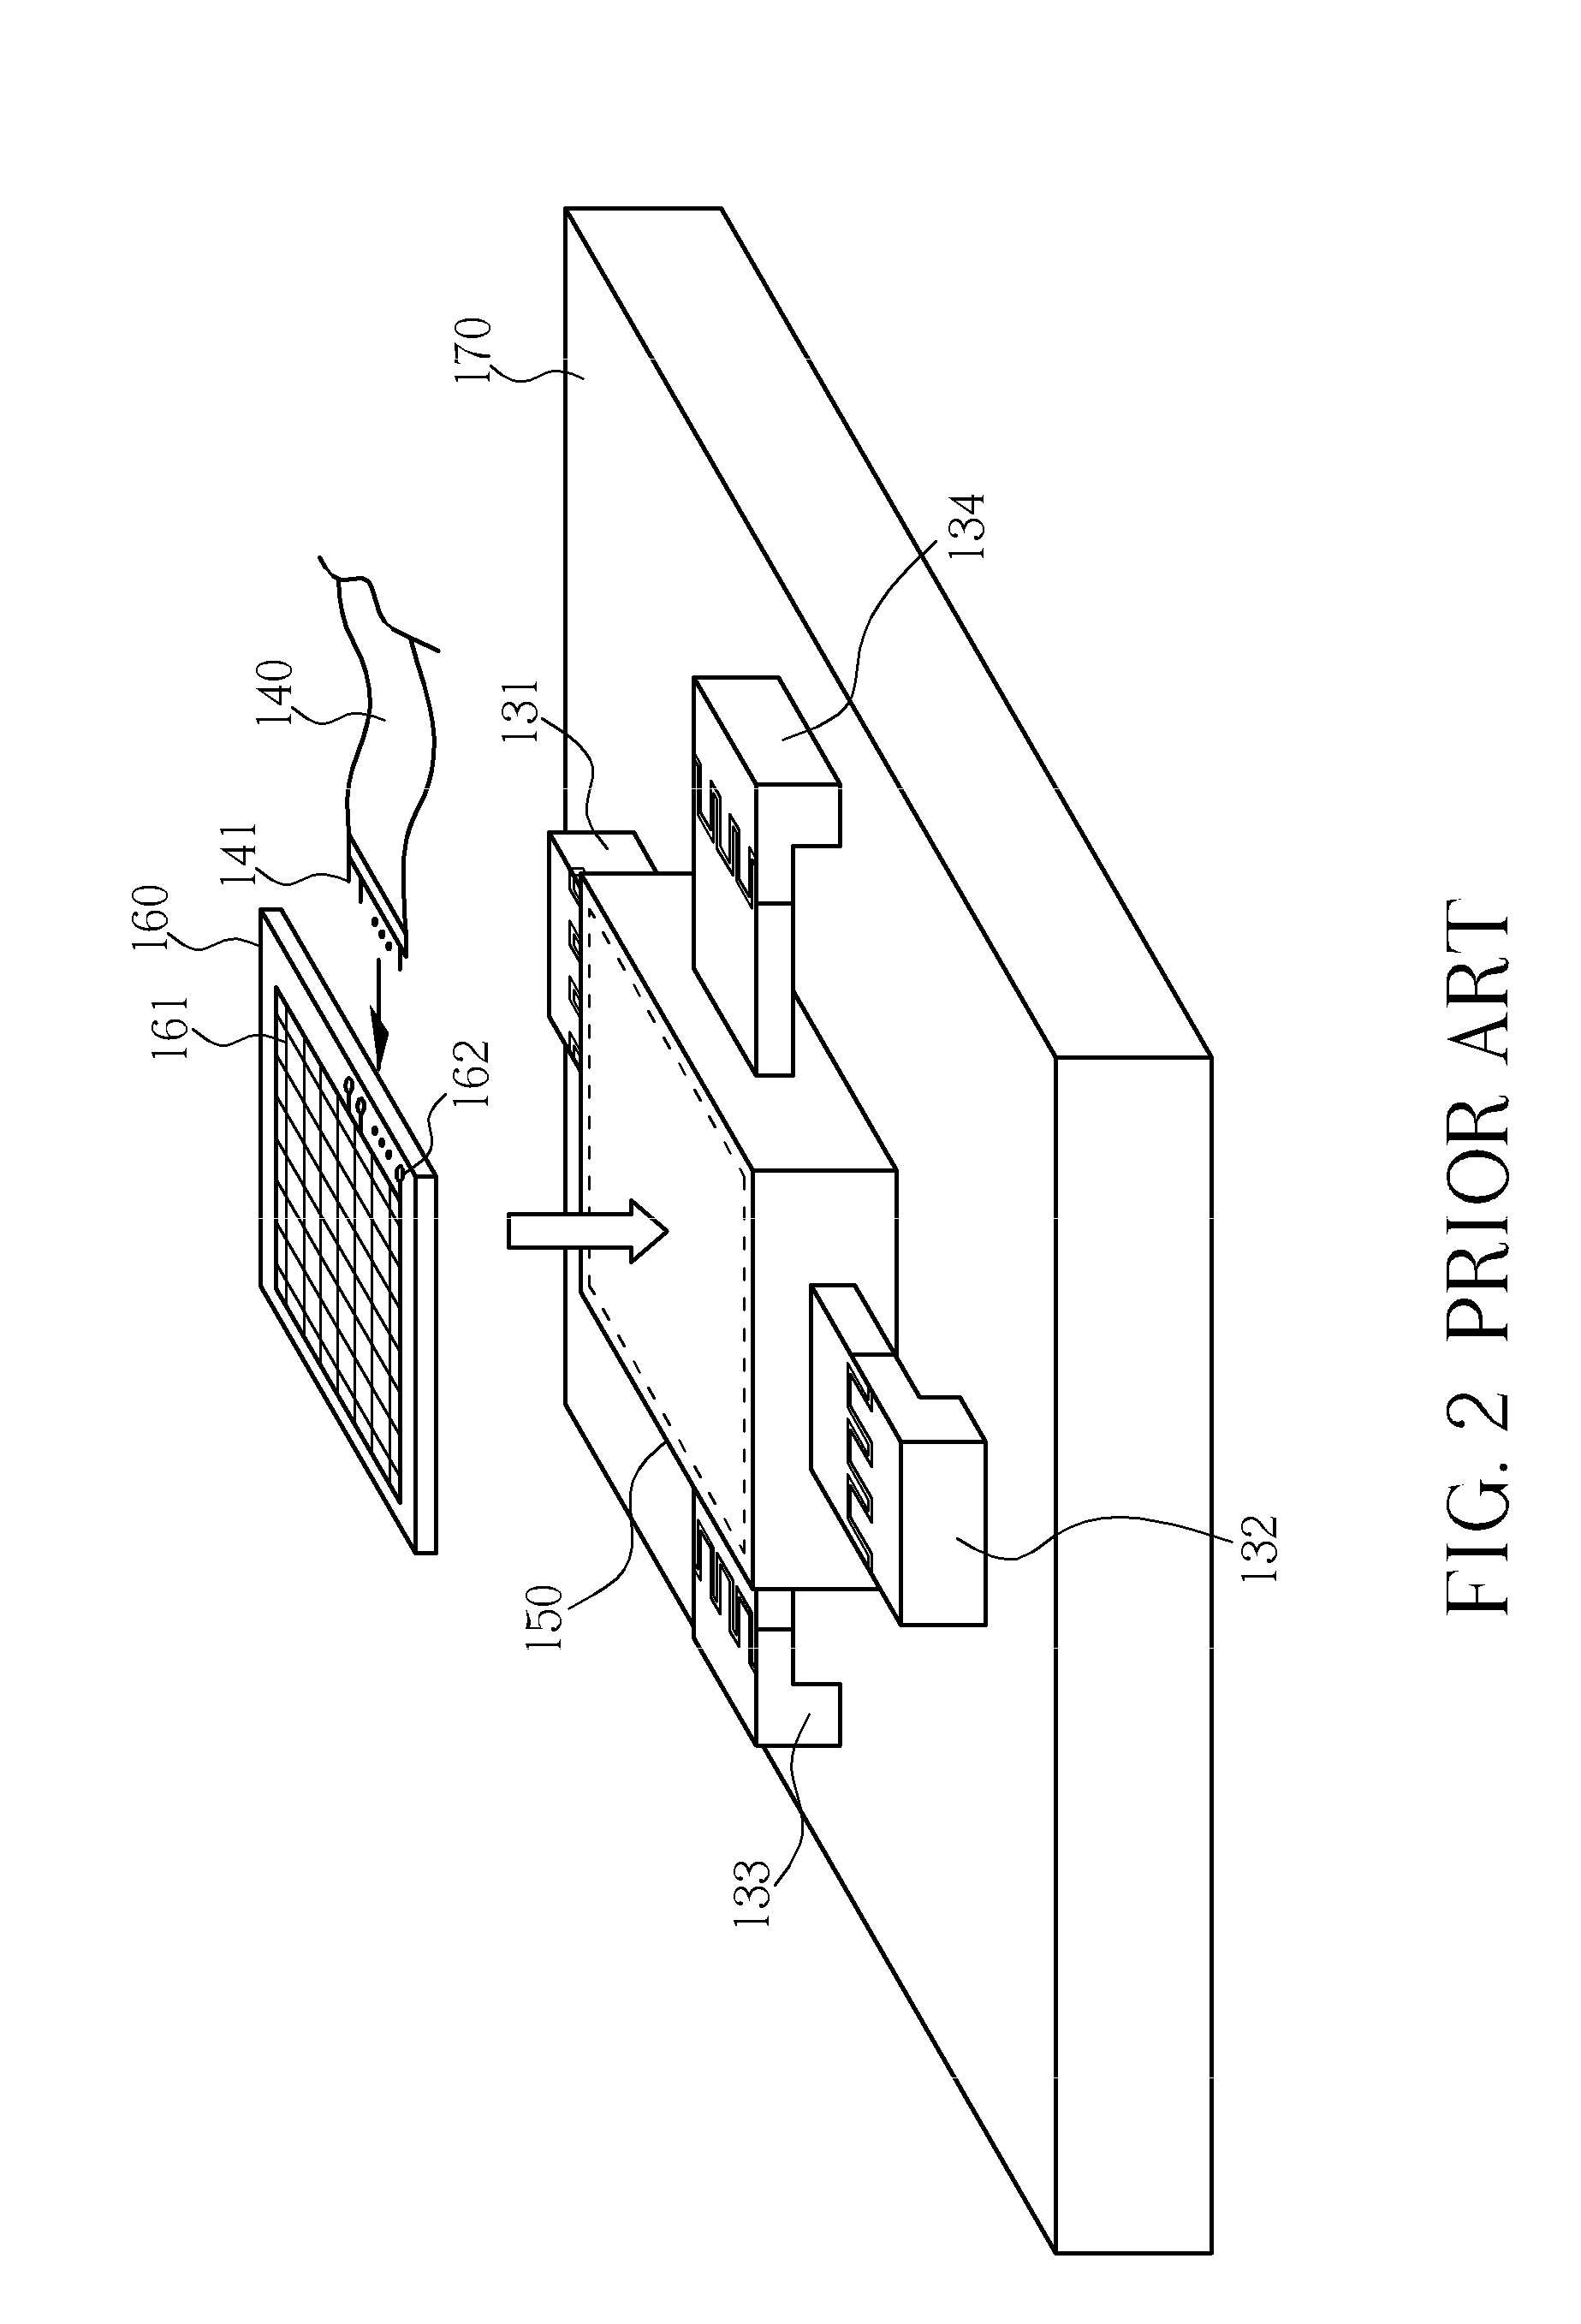 Micro-optical image stabilizer